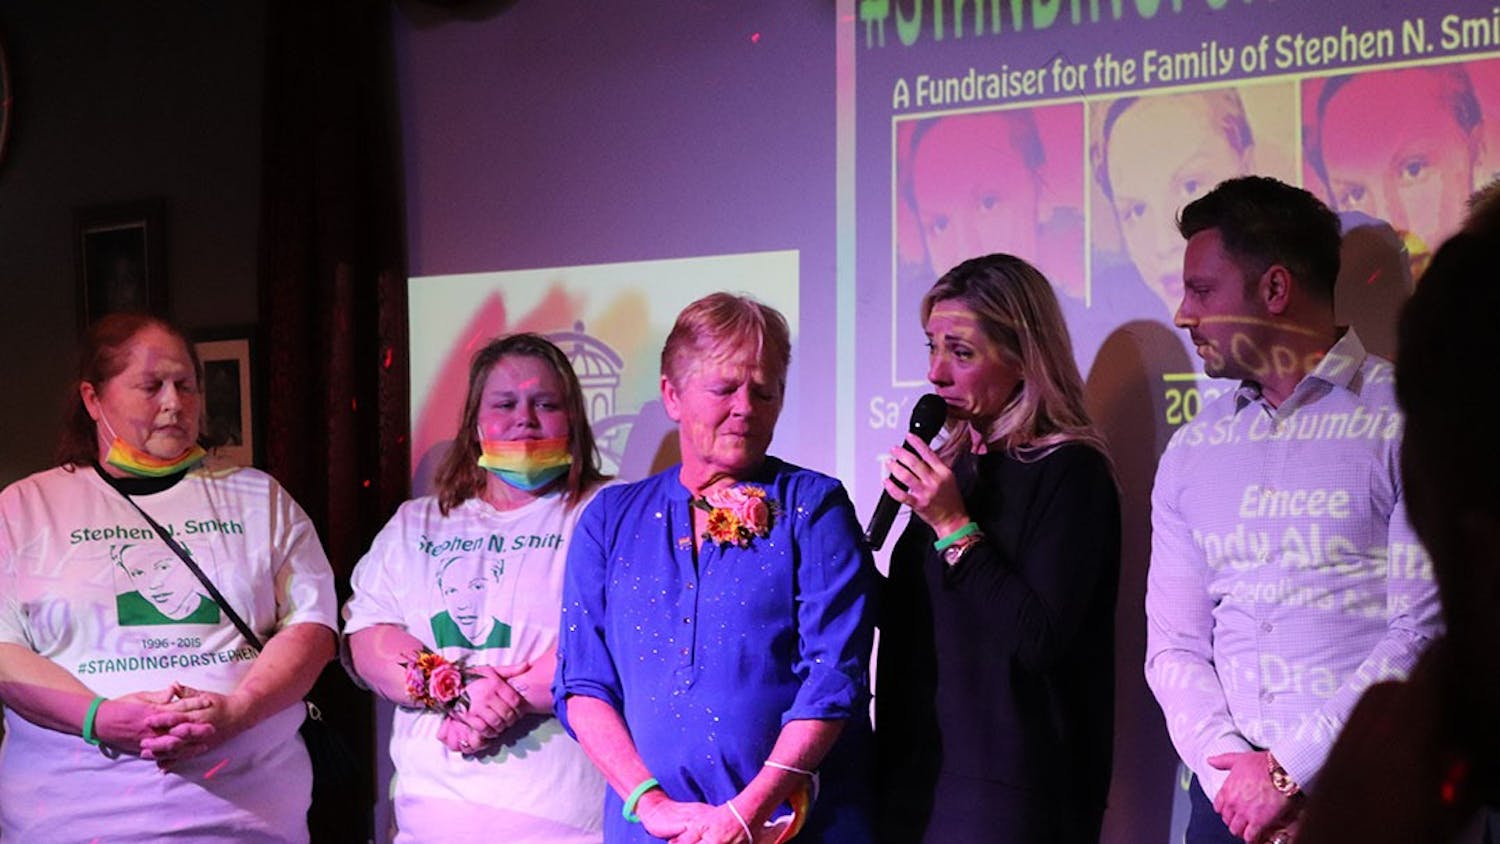 Sandy Smith (center) stands beside her daughter Stephanie Smith (left) and Susanne Andrews (right), a organizer of the #StandingforStephen event. The event was a fundraiser held at the Capital Club for the family of Stephen Smith, an openly gay 19-year-old who was killed in what was declared an unsolved hit and run in 2015. Stephen’s case was reopened earlier this year “based upon information gathered during the course of the double murder investigation of Paul and Maggie Murdaugh,” according to a statement by SLED.